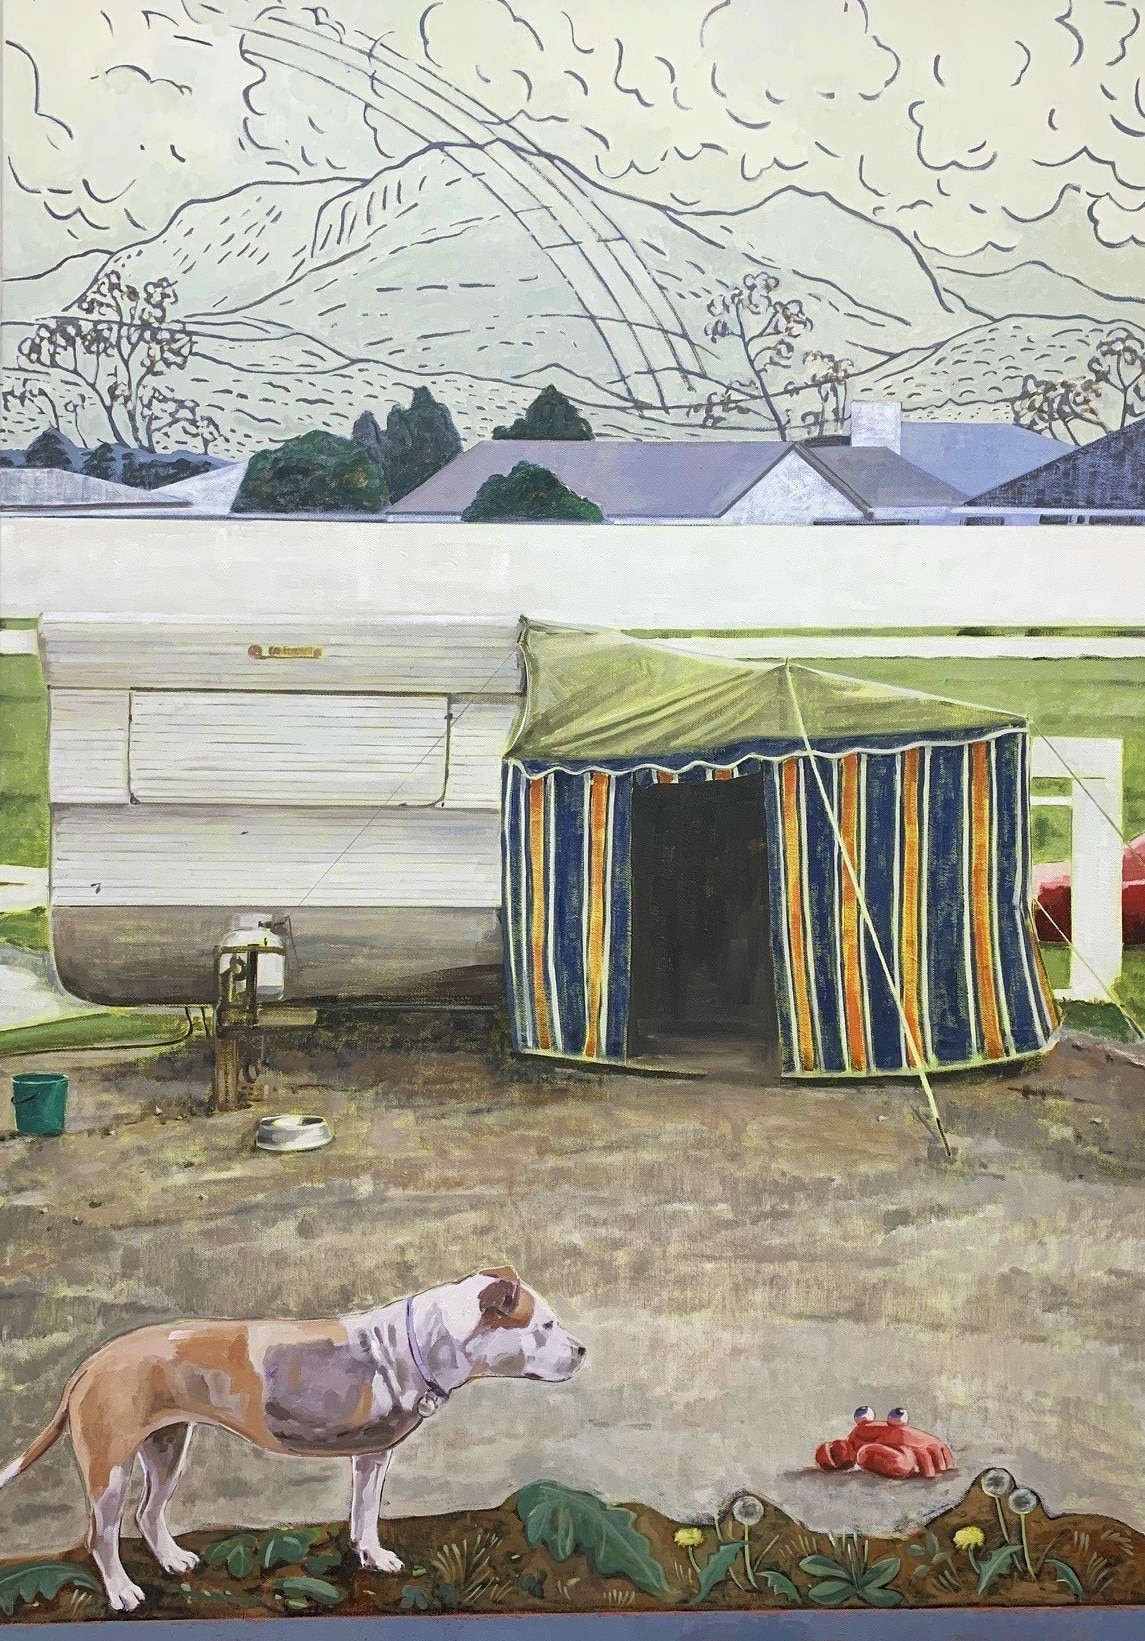 A painting of a caravan and tent with a three-legged dog and children's toy outside.